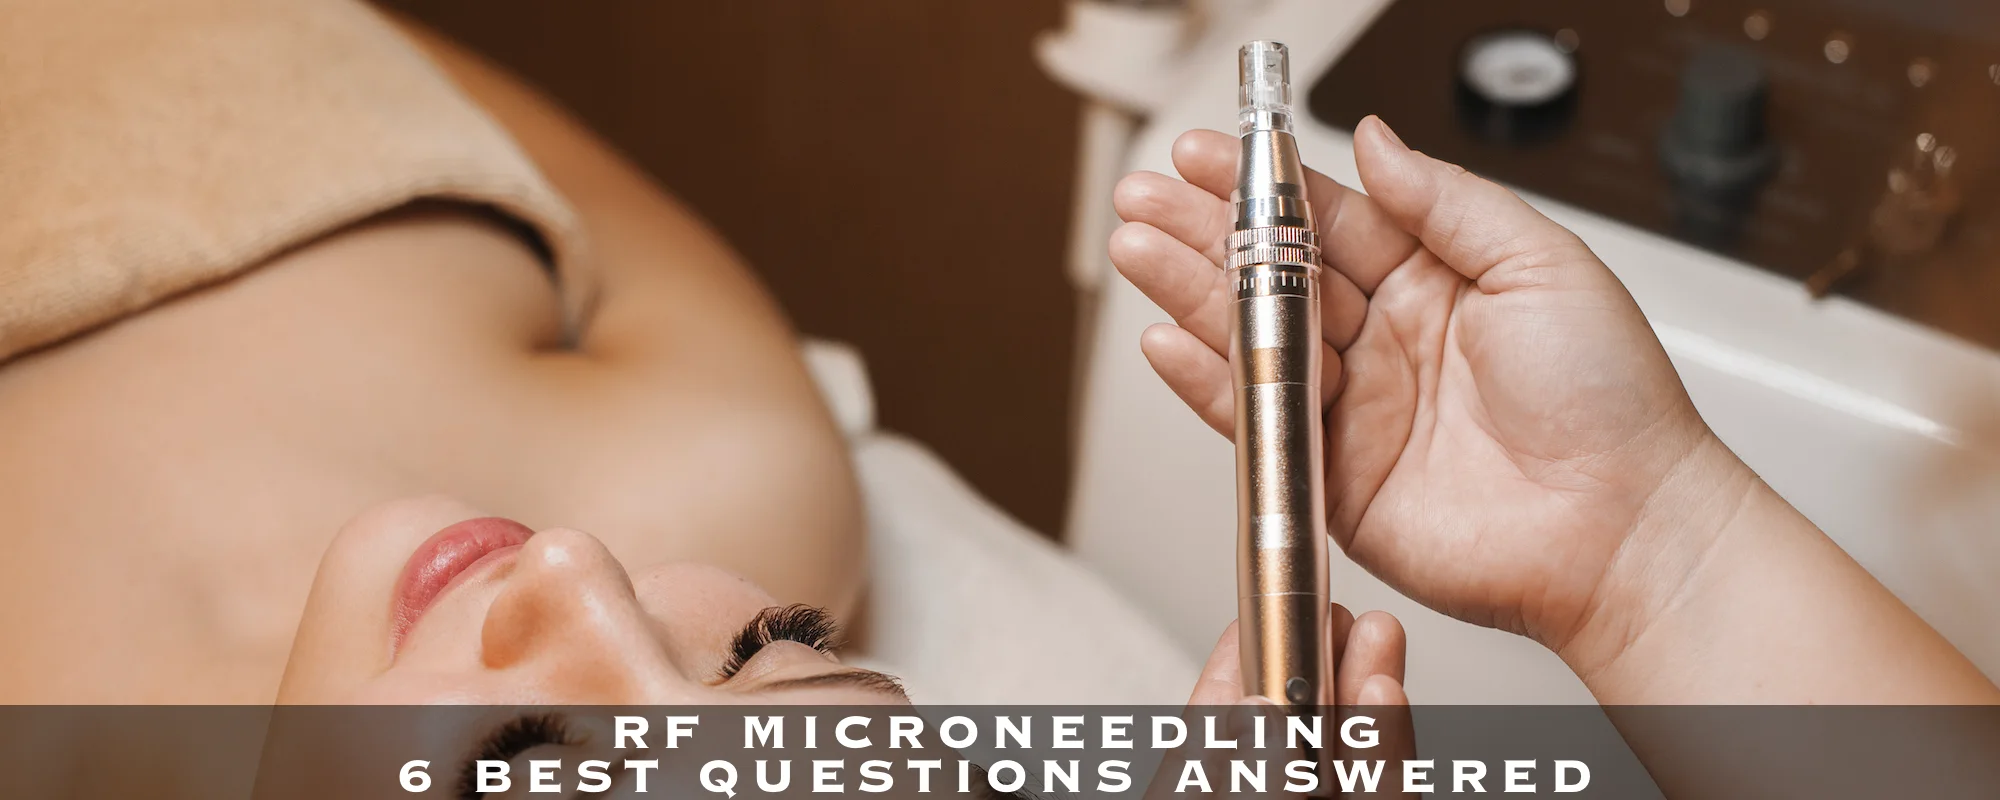 RF MICRONEEDLING - 6 BEST QUESTIONS ANSWERED